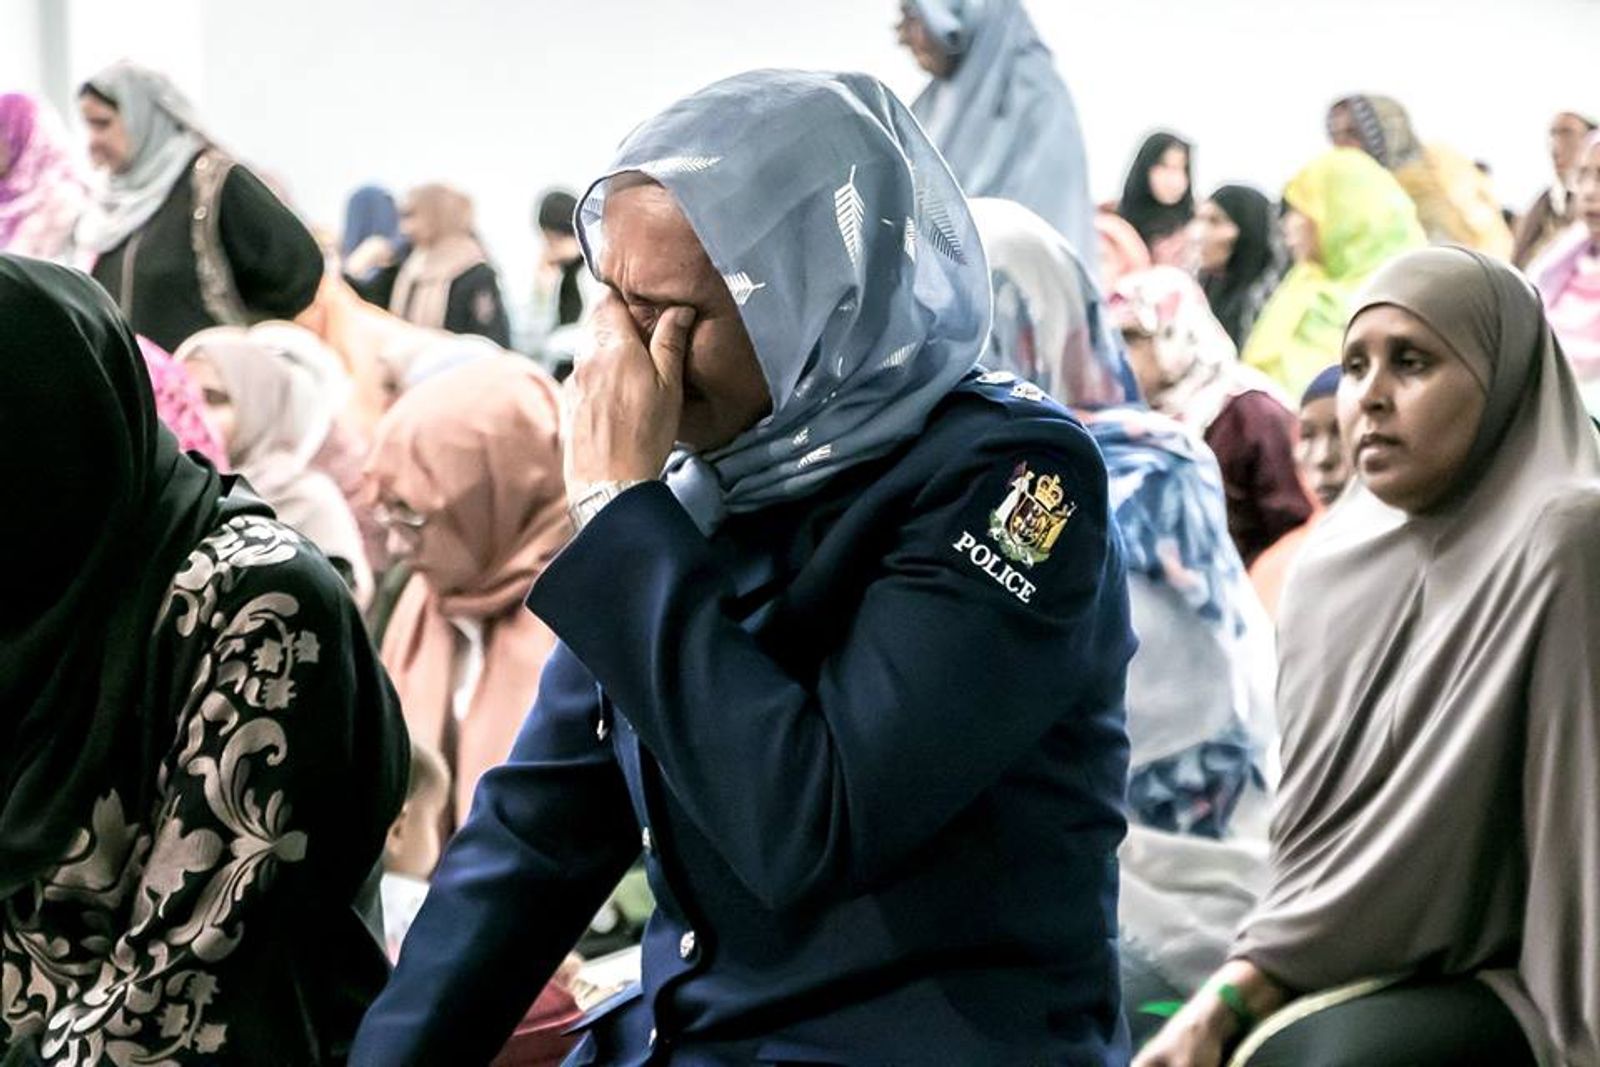 © Serena Stevenson - A Muslim woman New Zealand police officer morns openly during the Auckland Memorial.